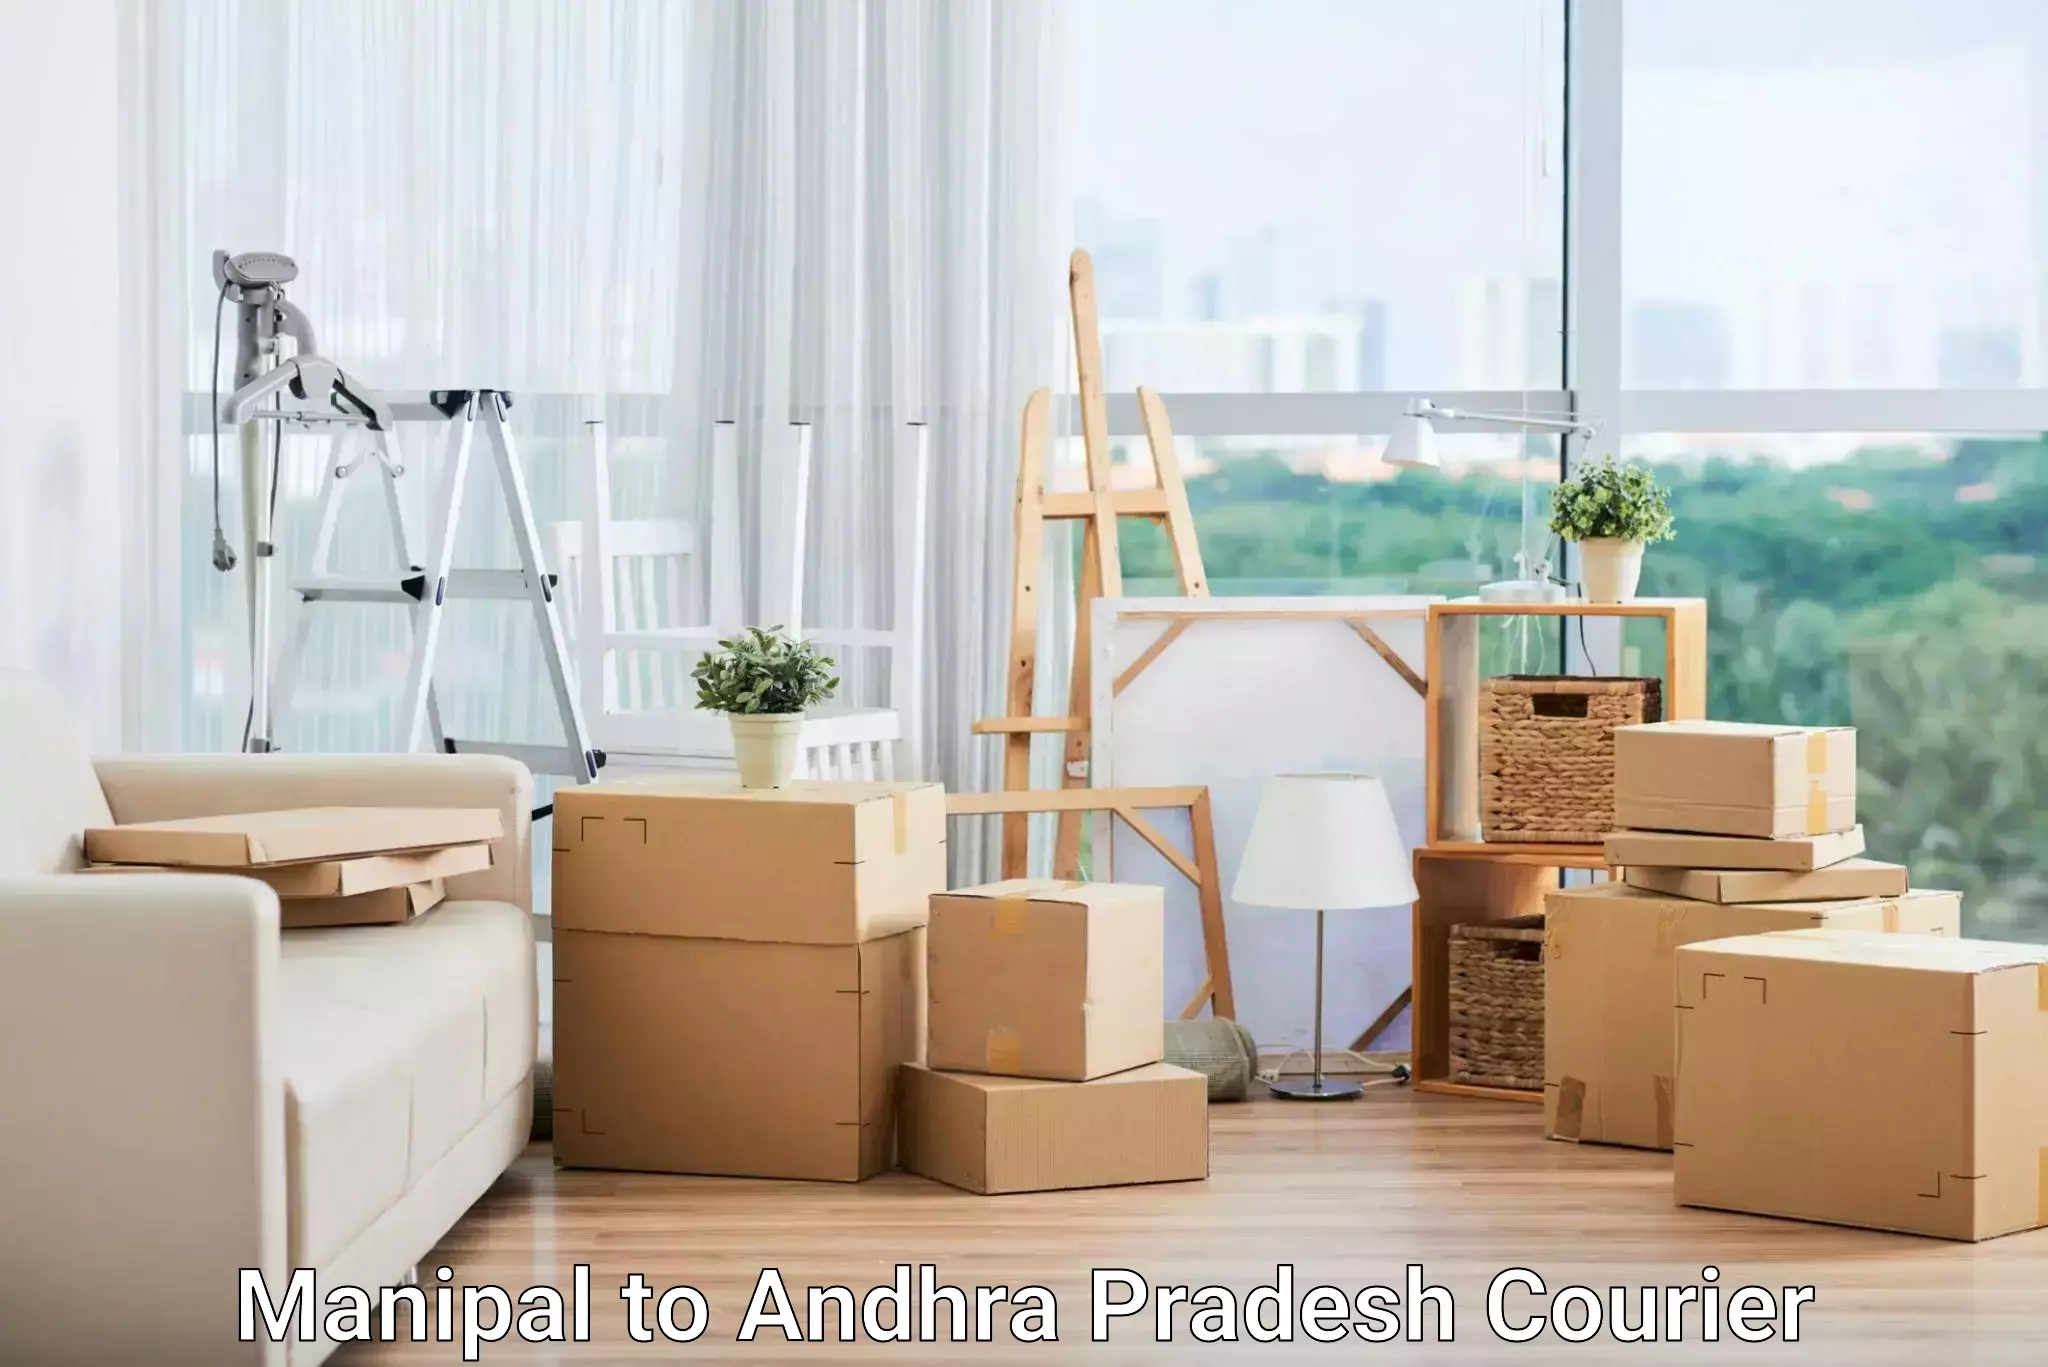 State-of-the-art courier technology Manipal to Andhra Pradesh